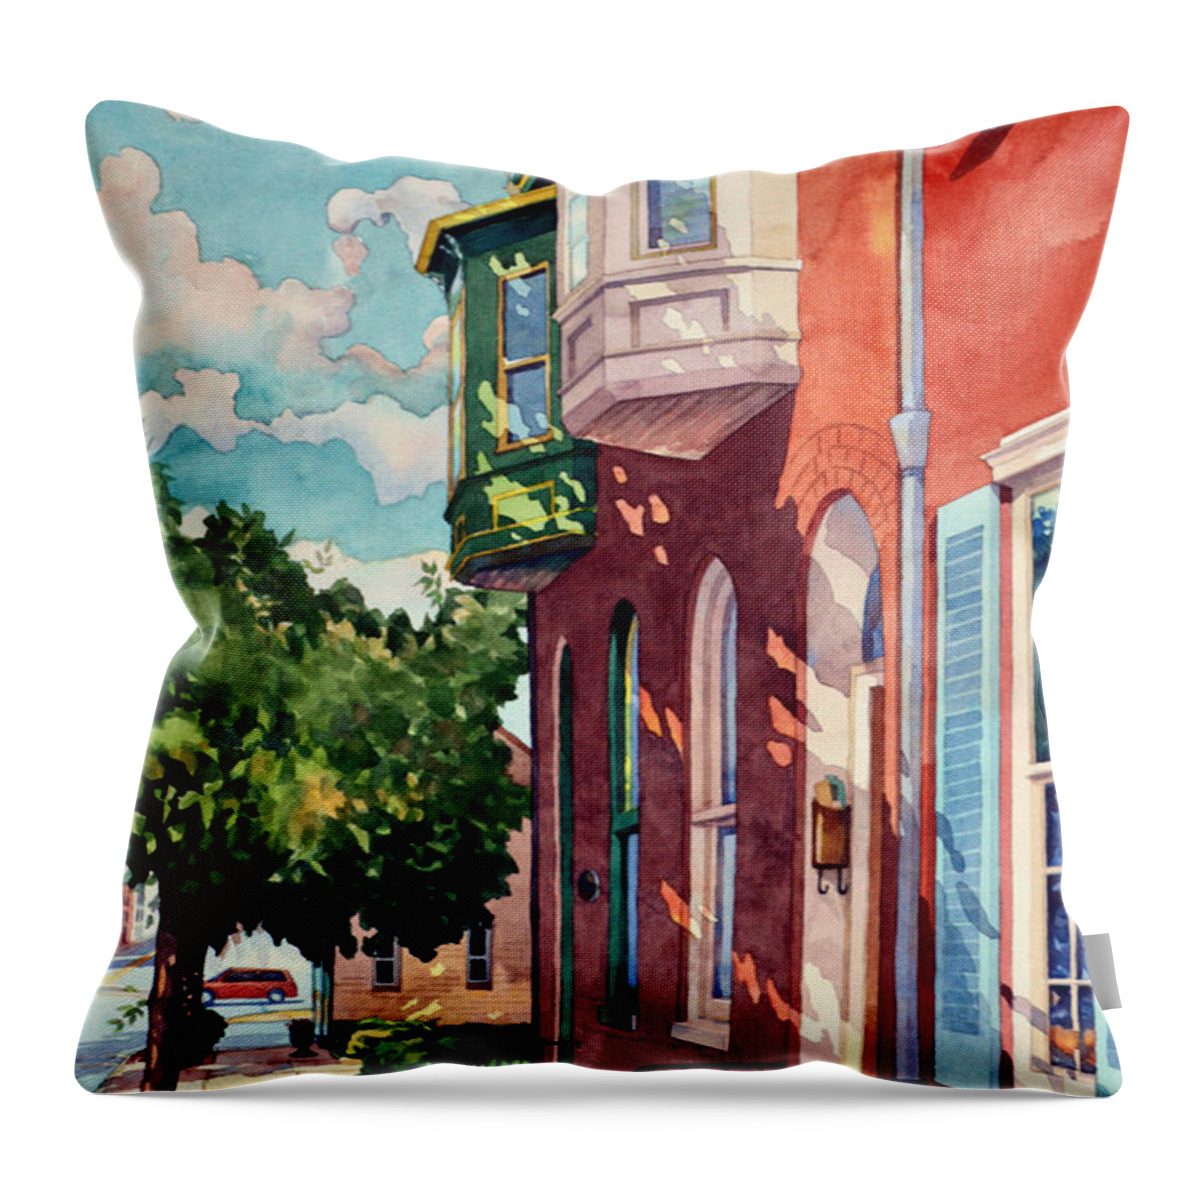 Landscape Throw Pillow featuring the painting Siblings by Mick Williams